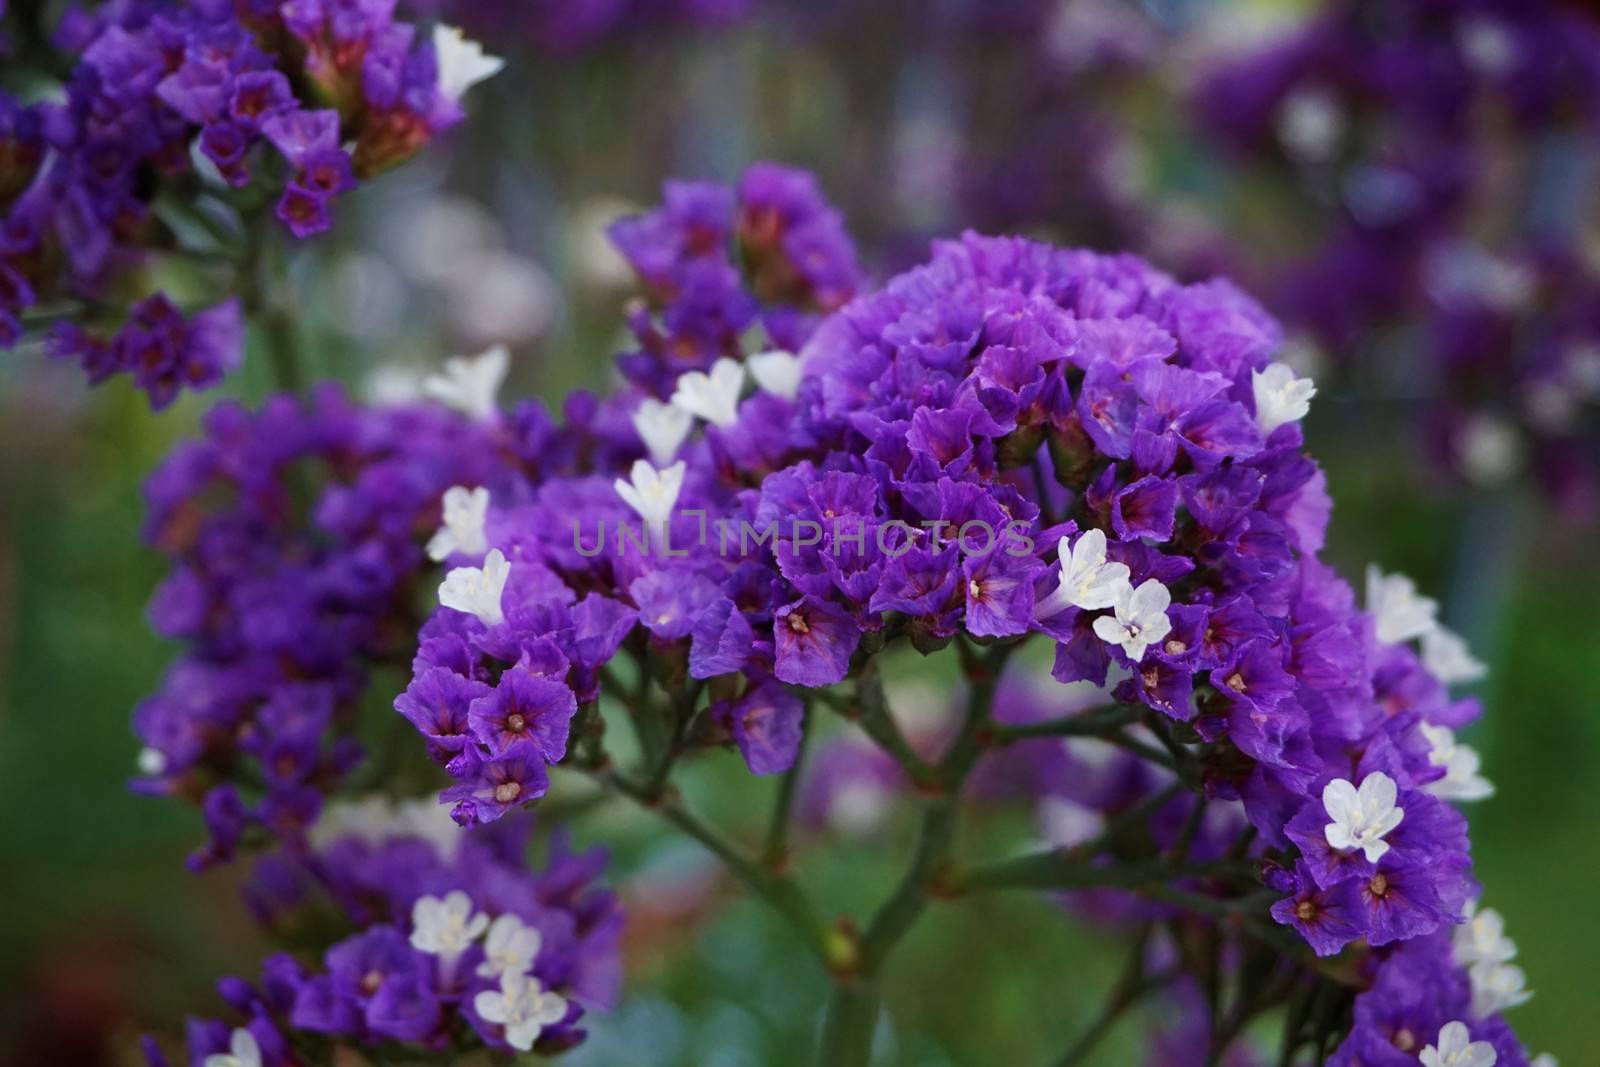 Purple and white Limonium blossoms also known as sea lavender or marsh rosemary